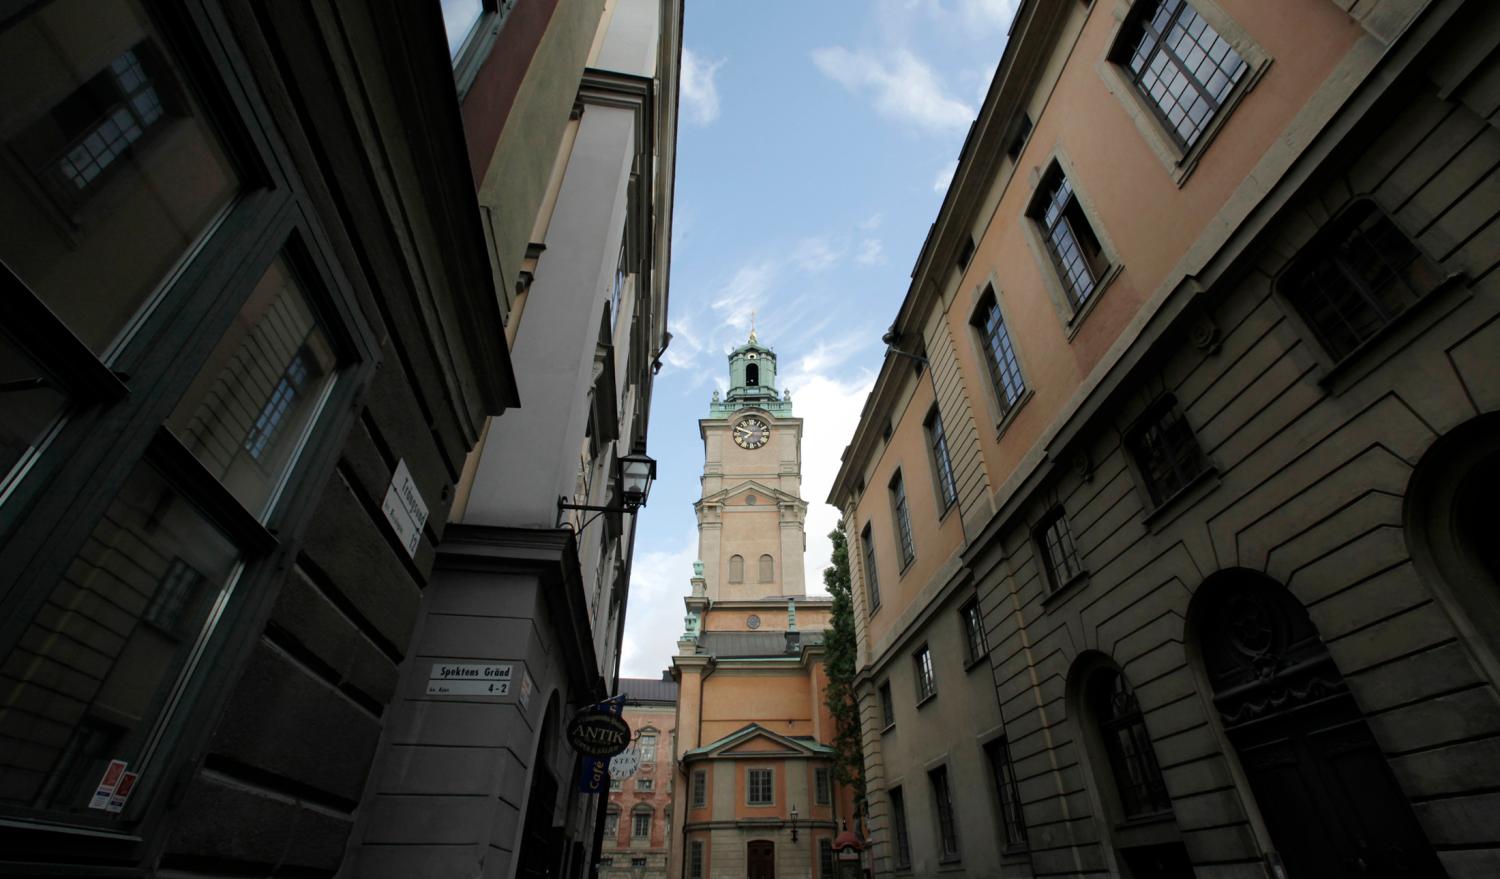 REUTERS/Bob Strong - The Stockholm Cathedral is seen in Gamla Stan or the Old Town district of Stockholm June 14, 2010. Sweden's Crown Princess Victoria and her fiance Daniel Westling will be married in the cathedral on June 19, 2010.